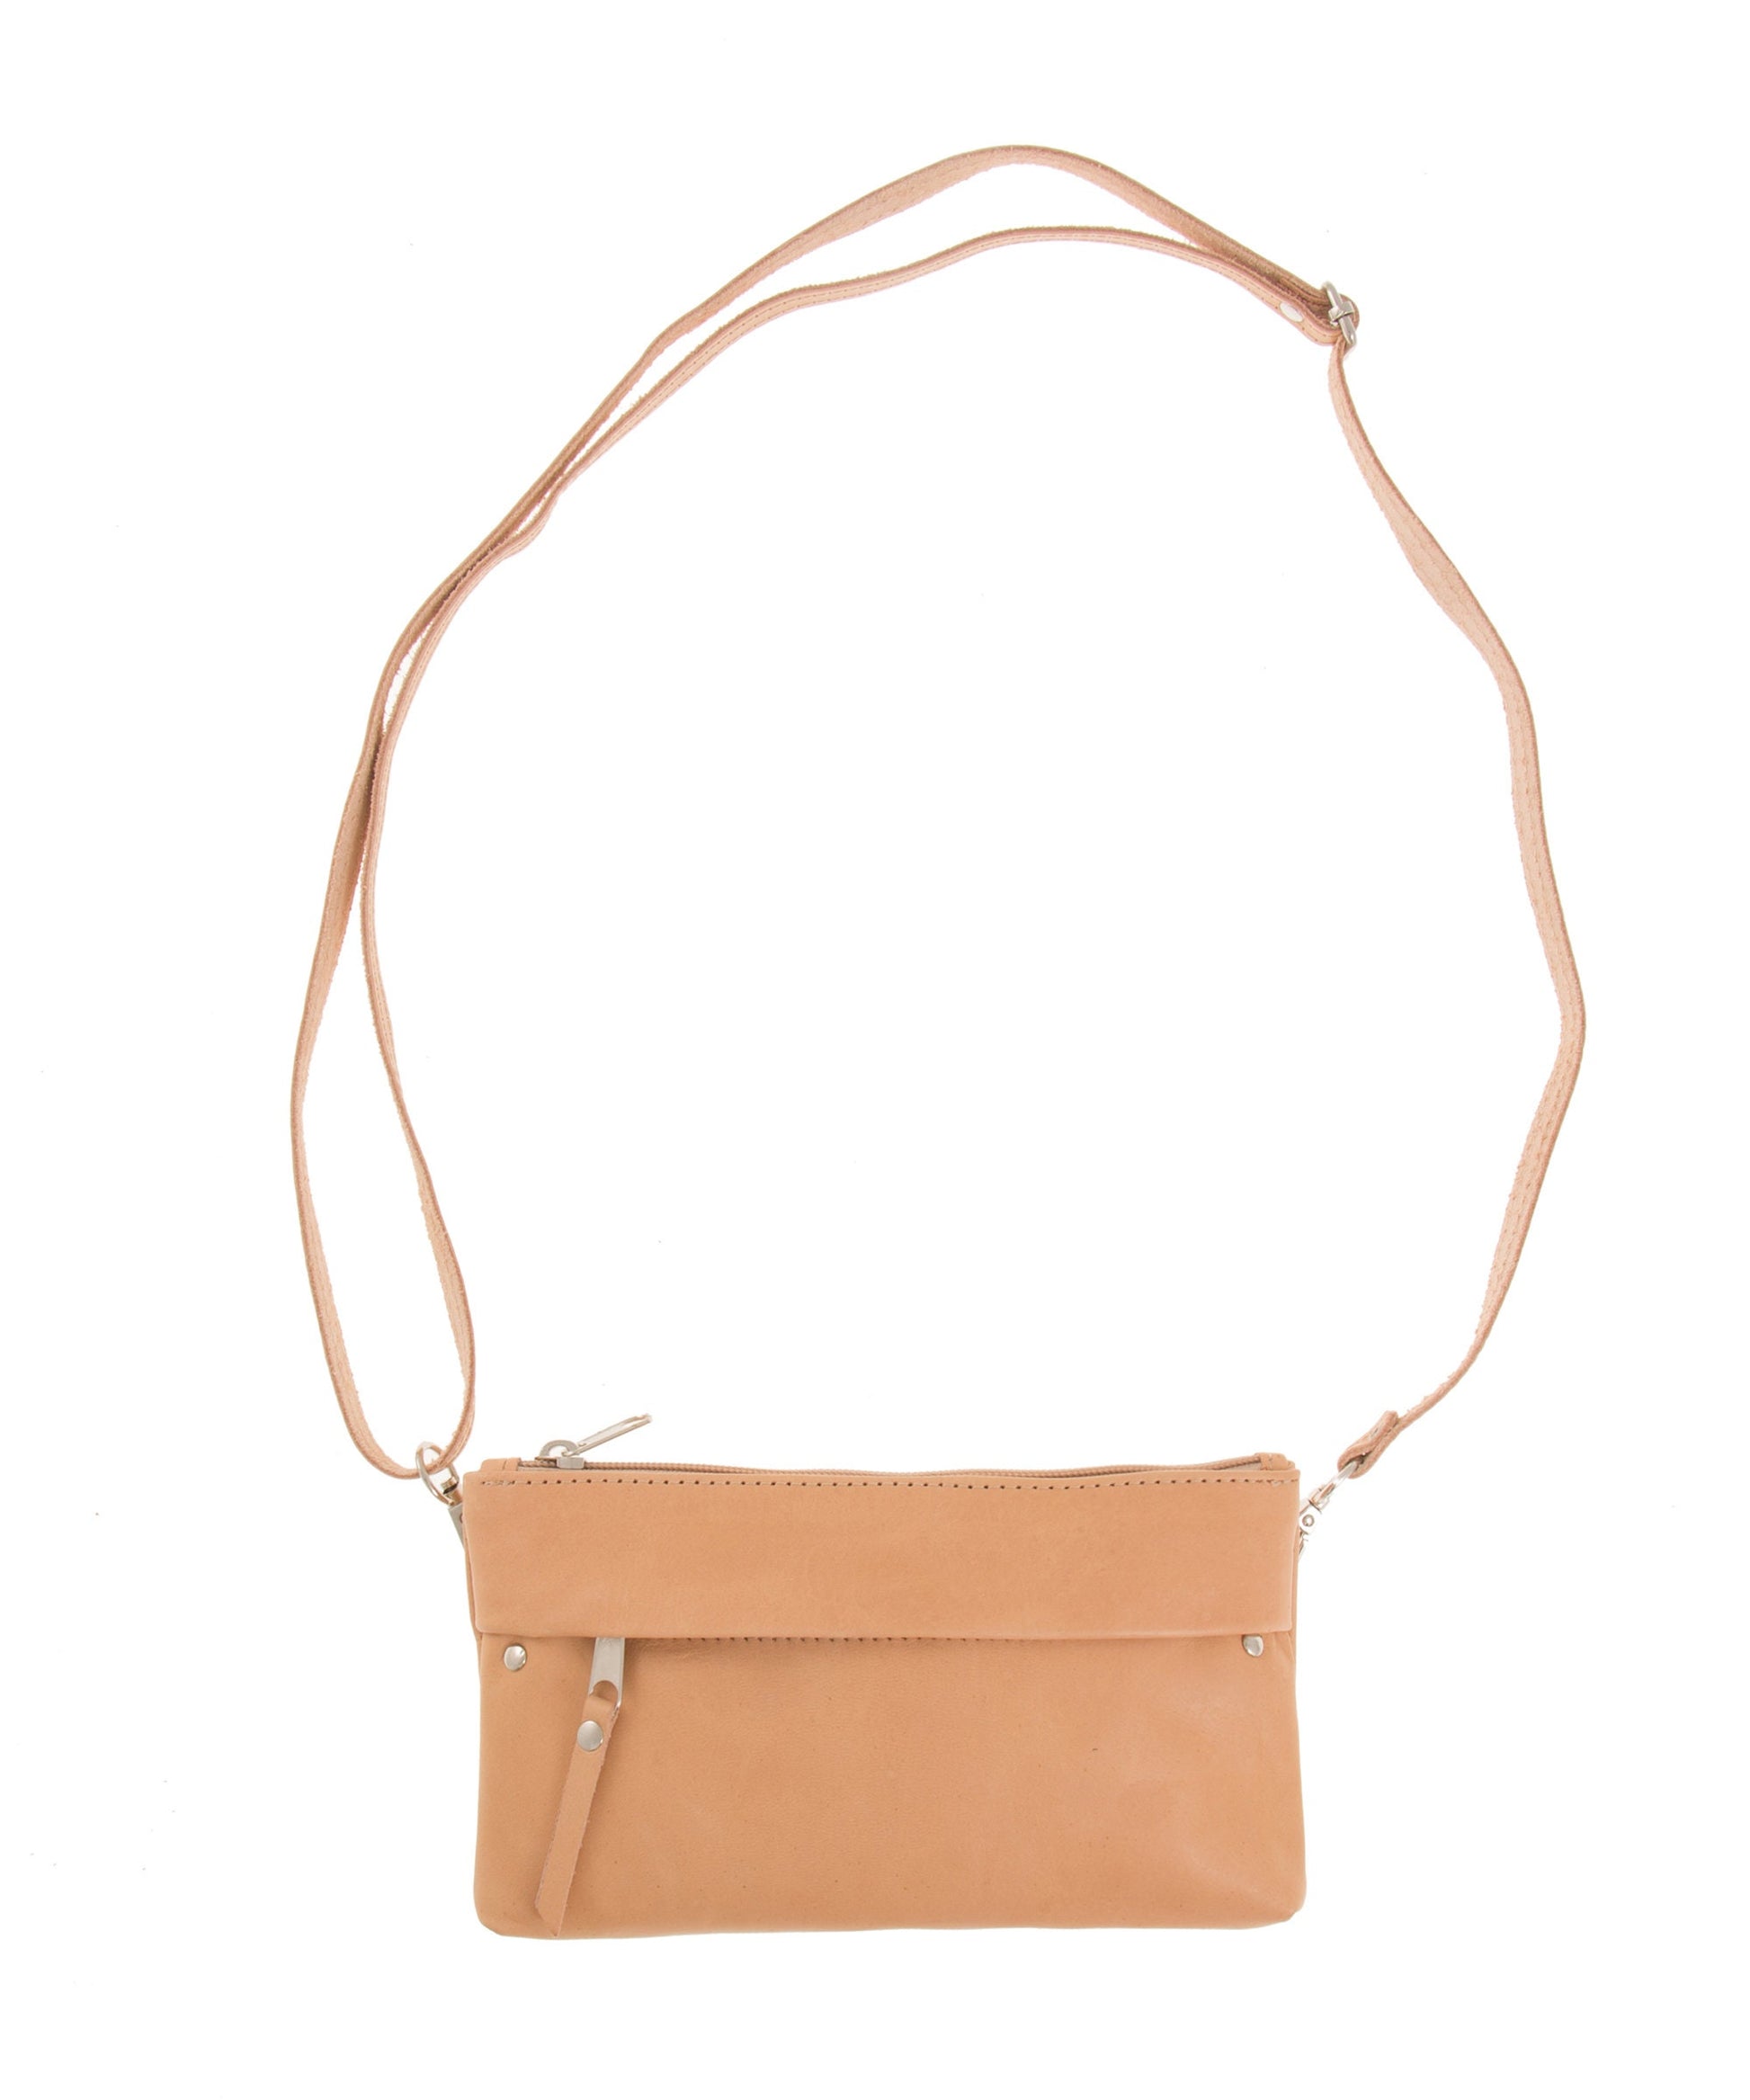 Small leather crossbody bag for women, Leather crossbody clutch, Small leather purse